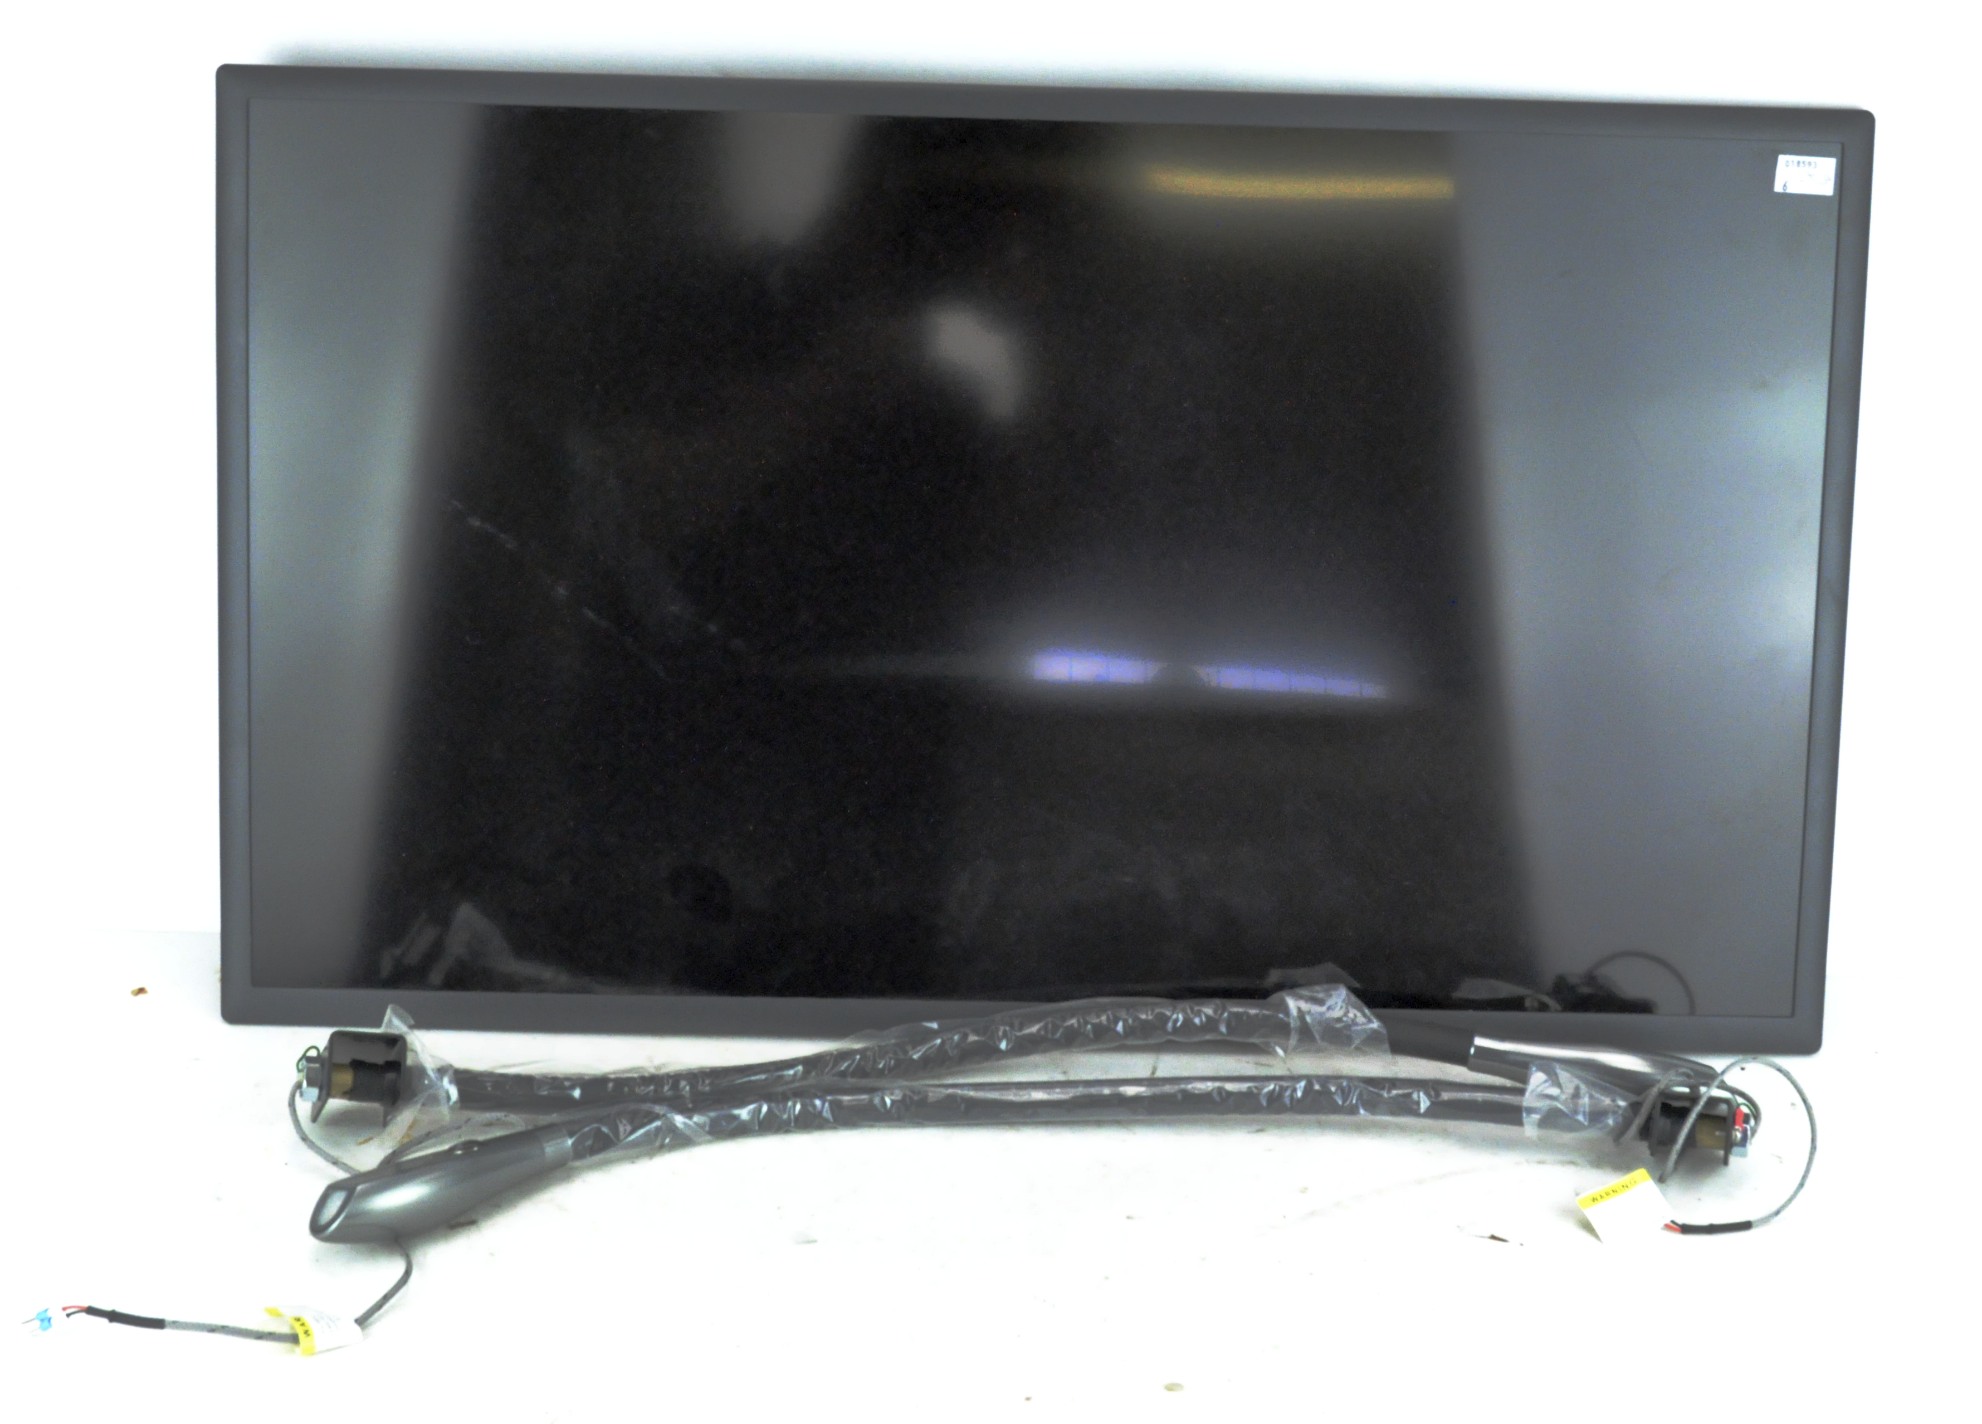 A 31 inch Samsung flat screen television together with two new 60 cm Zonda Beadlights